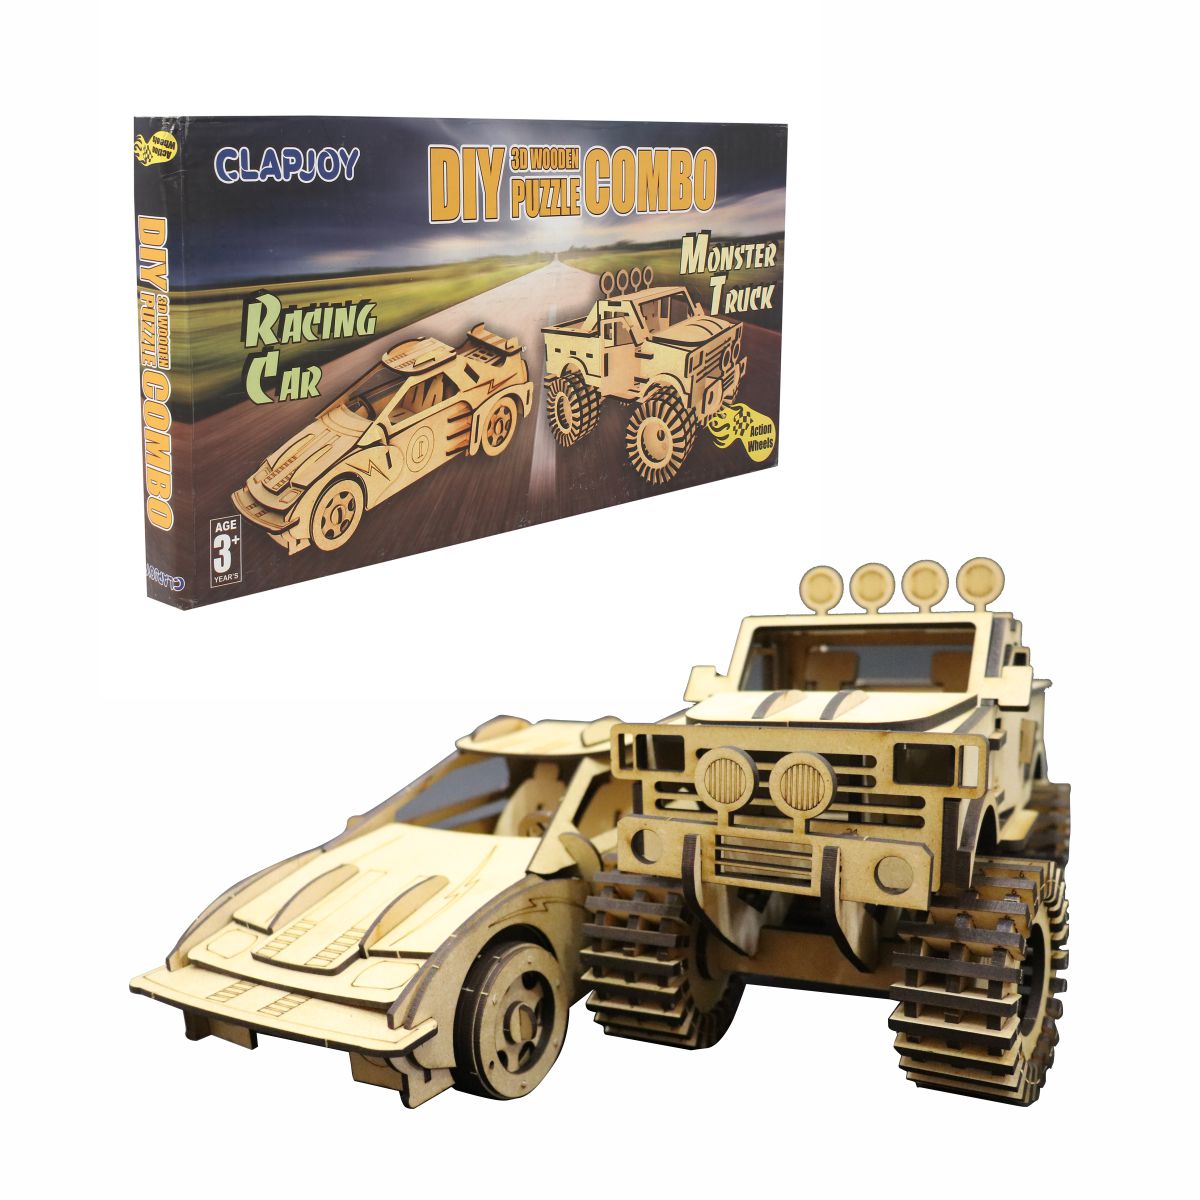 ClapJoy 3D Wooden Puzzle Racing Car and Truck Combo for kids for age 6 years and above